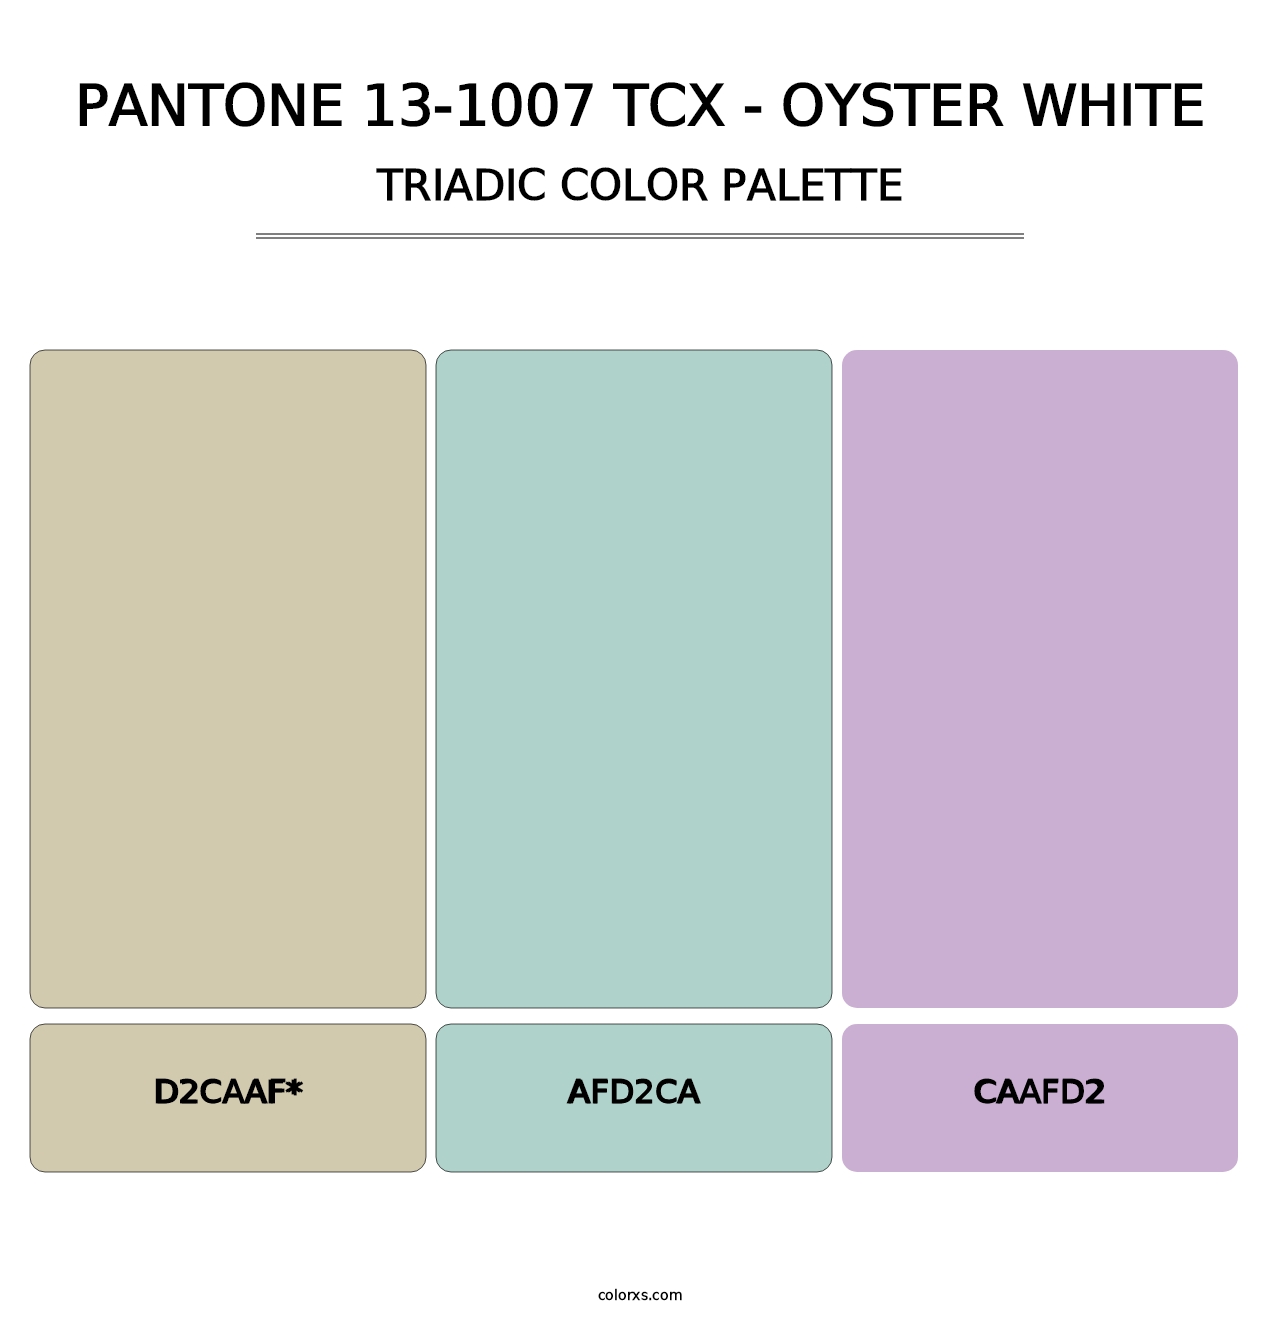 PANTONE 13-1007 TCX - Oyster White - Triadic Color Palette